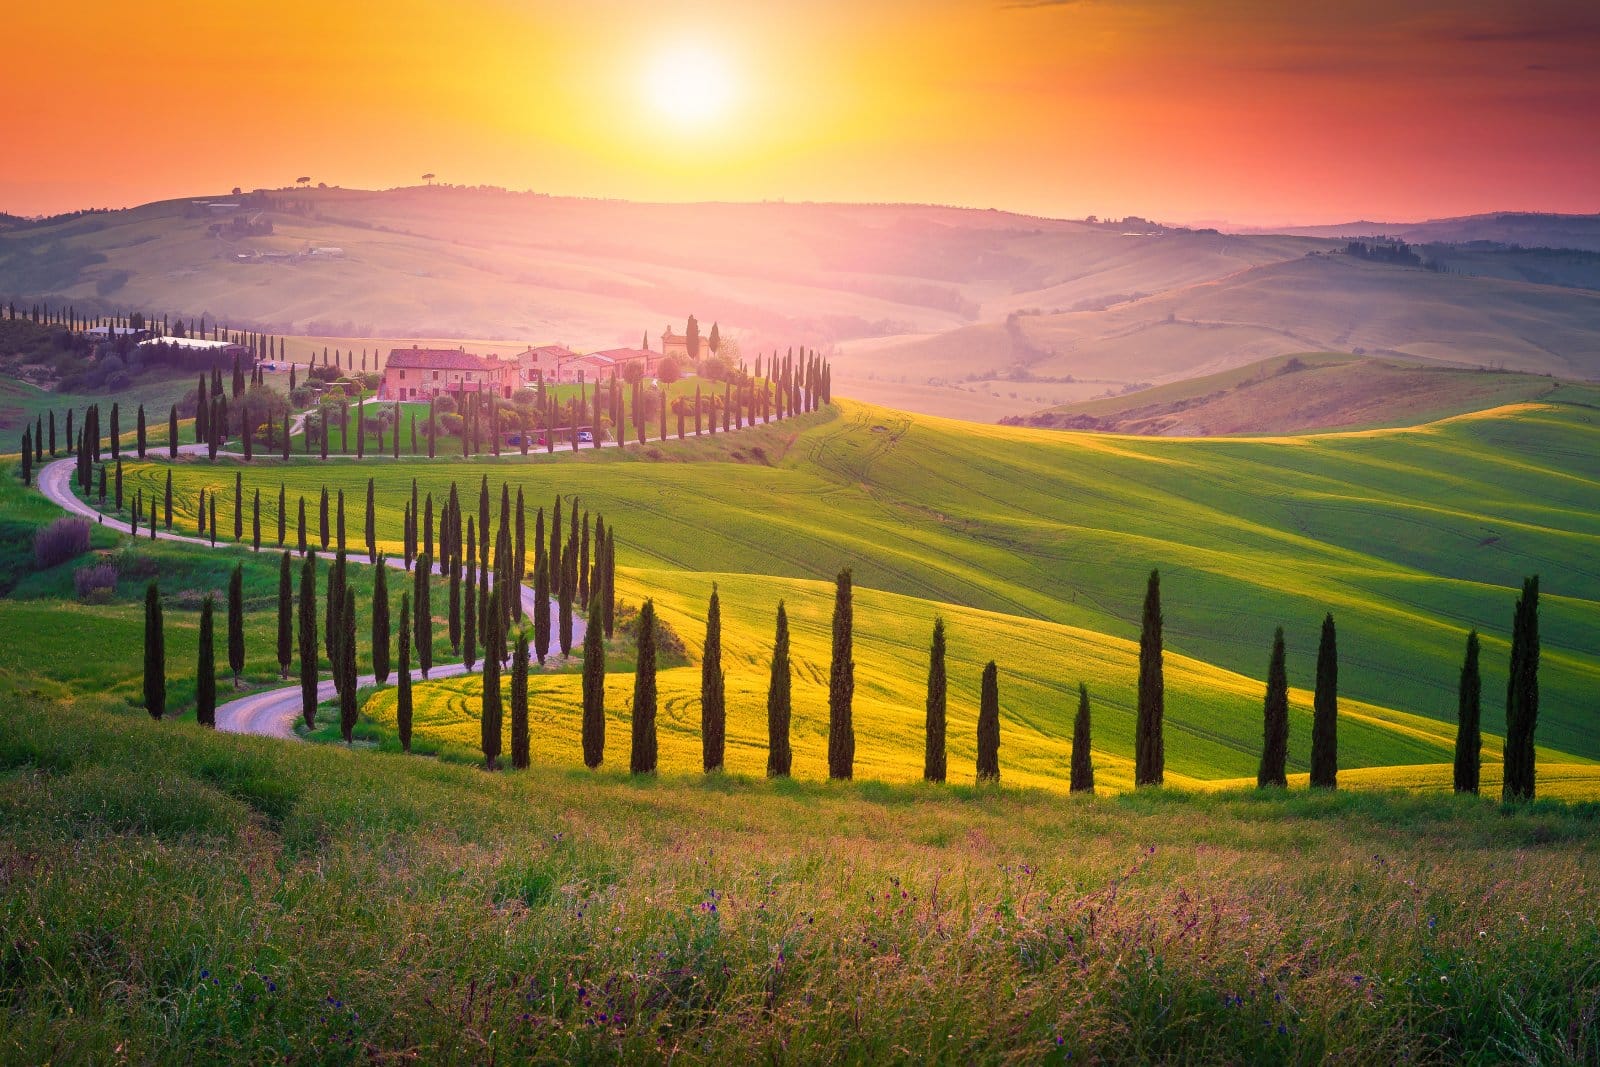 <p>Tuscany enjoys a mild climate year-round, with warm summers and mild winters. This temperate weather allows retirees to enjoy outdoor activities like hiking, cycling, and gardening throughout the year.</p>